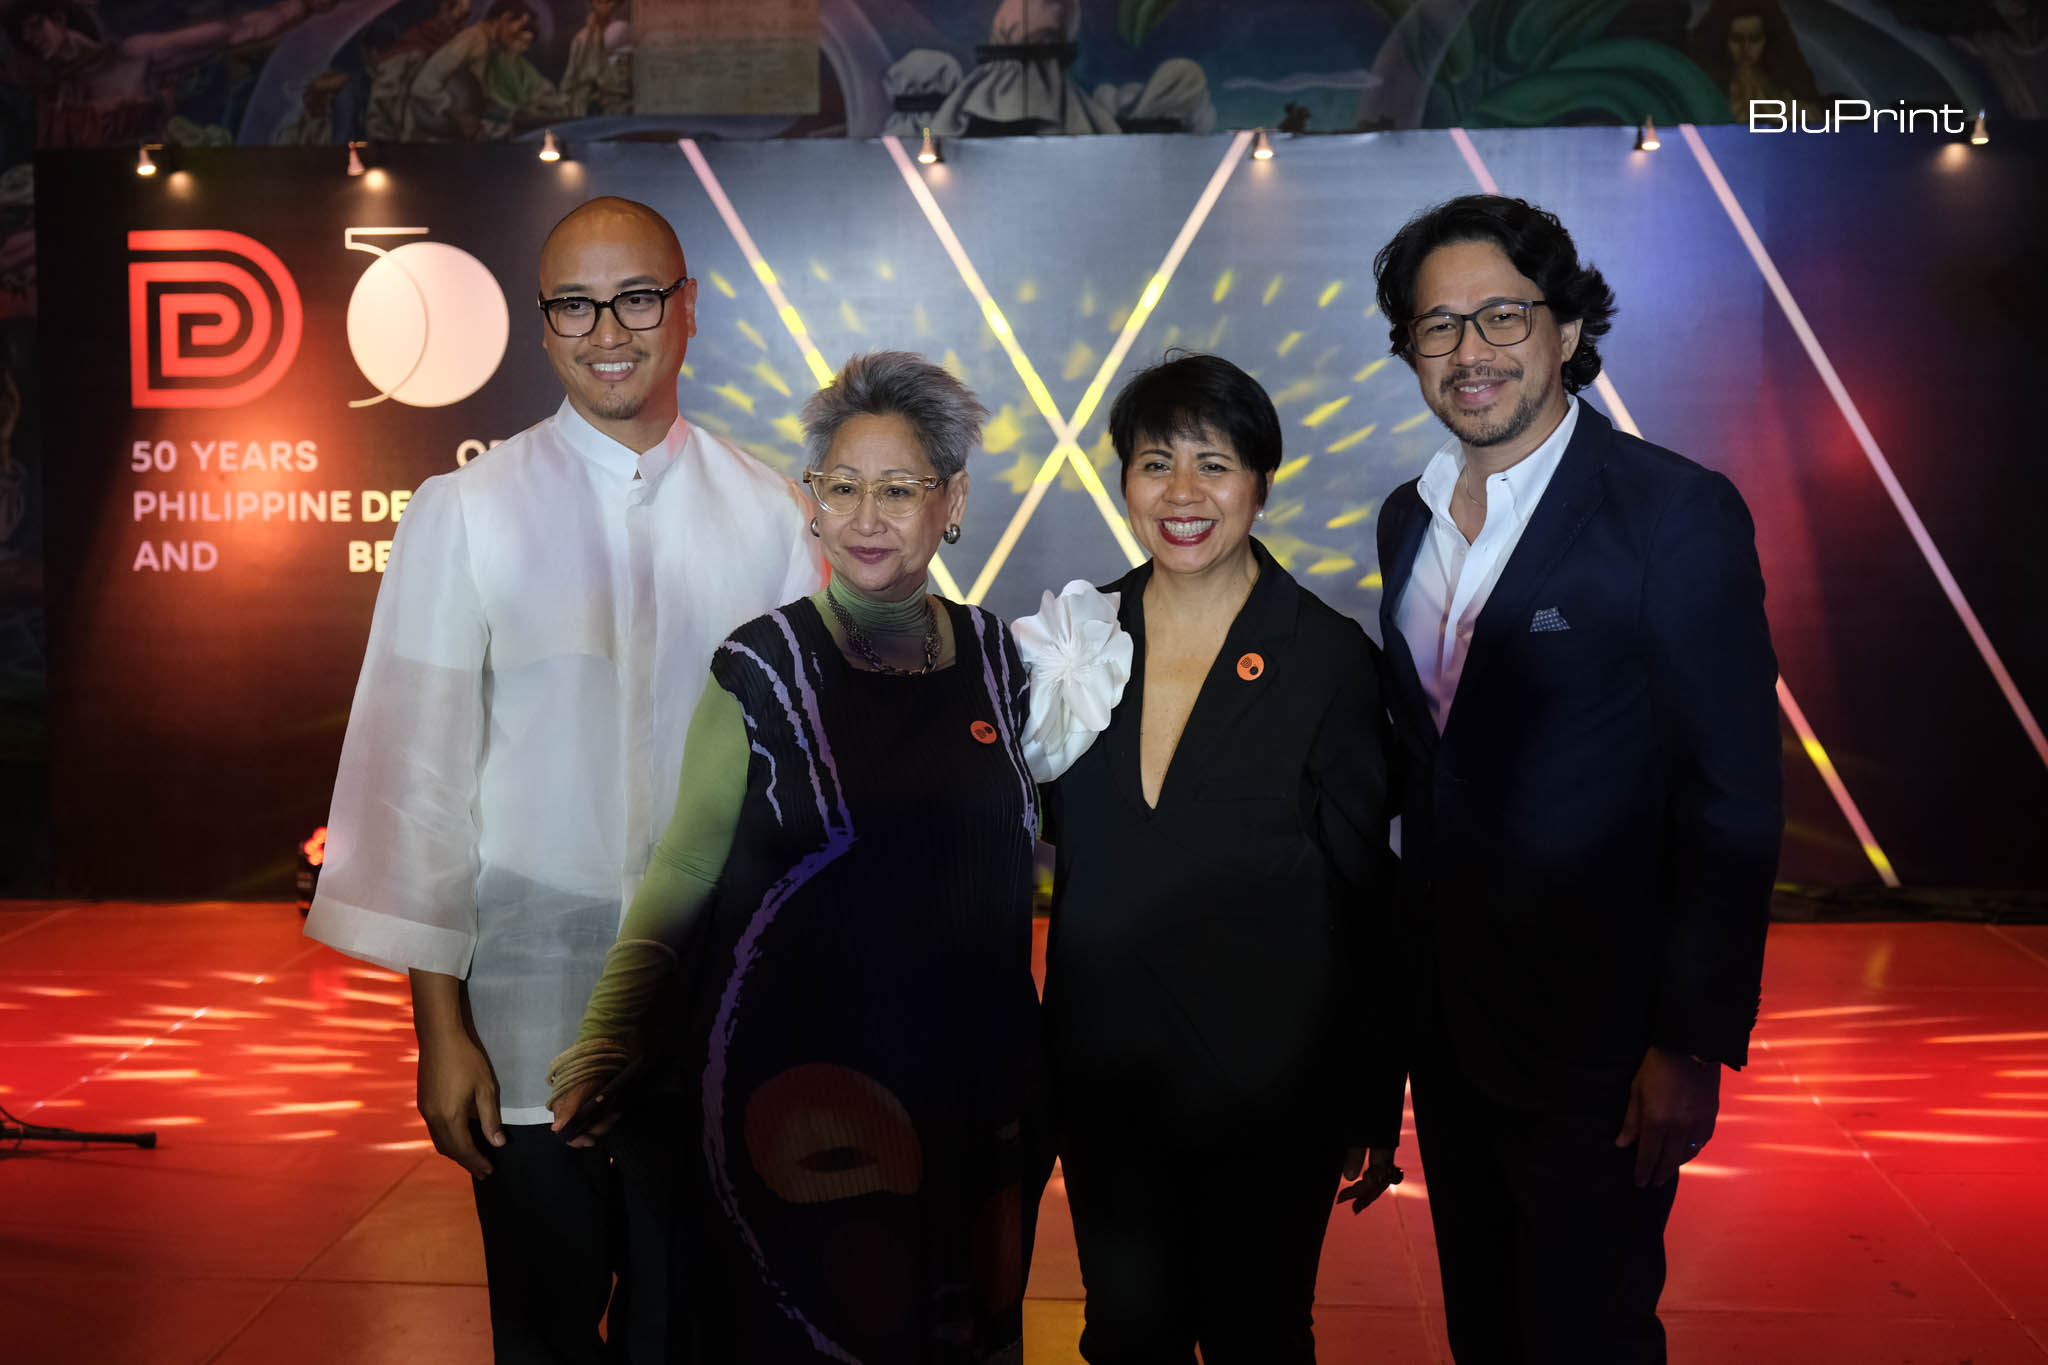 From left to right: National Museum Deputy Director, Jorell Legaspi, Exhibit Curator Marian Pastor Roces, Executive Director of the Design Center of the Philippines, Rhea Matute, and  Exhibition Designer Architect Royal Pineda.